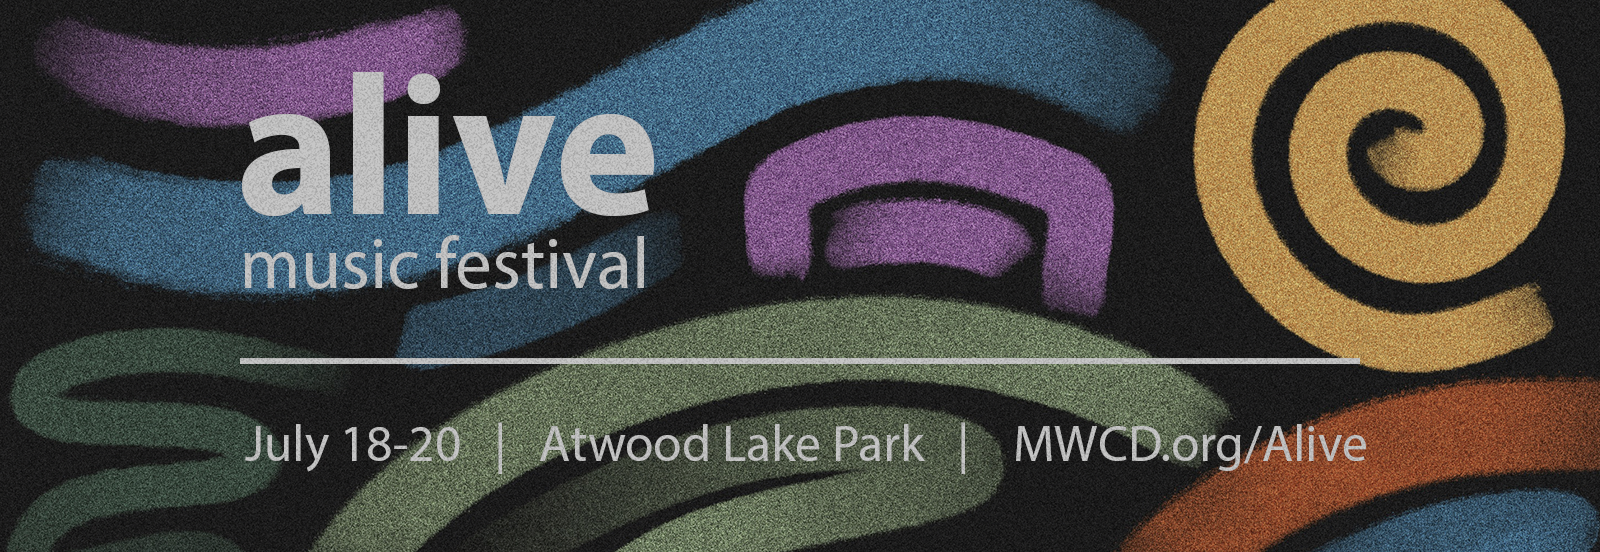 Alive Festival July 17-21 Atwood Lake Park